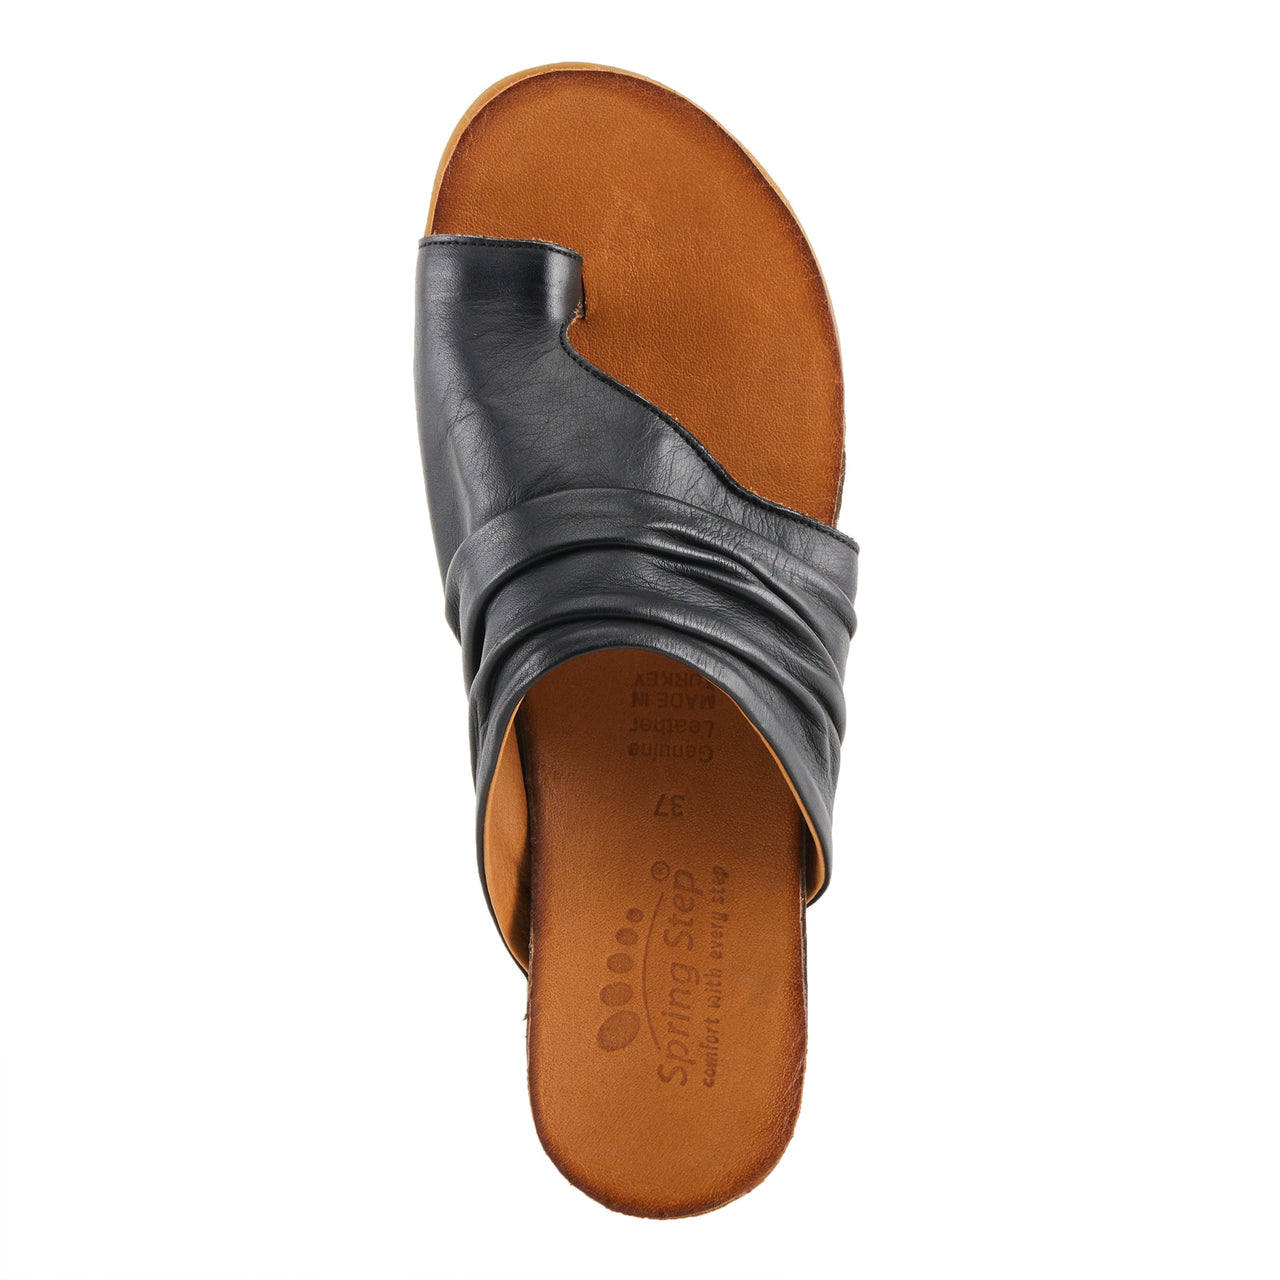 Black leather Spring Step Bates sandals with cushioned insoles and adjustable ankle straps for all-day comfort and style